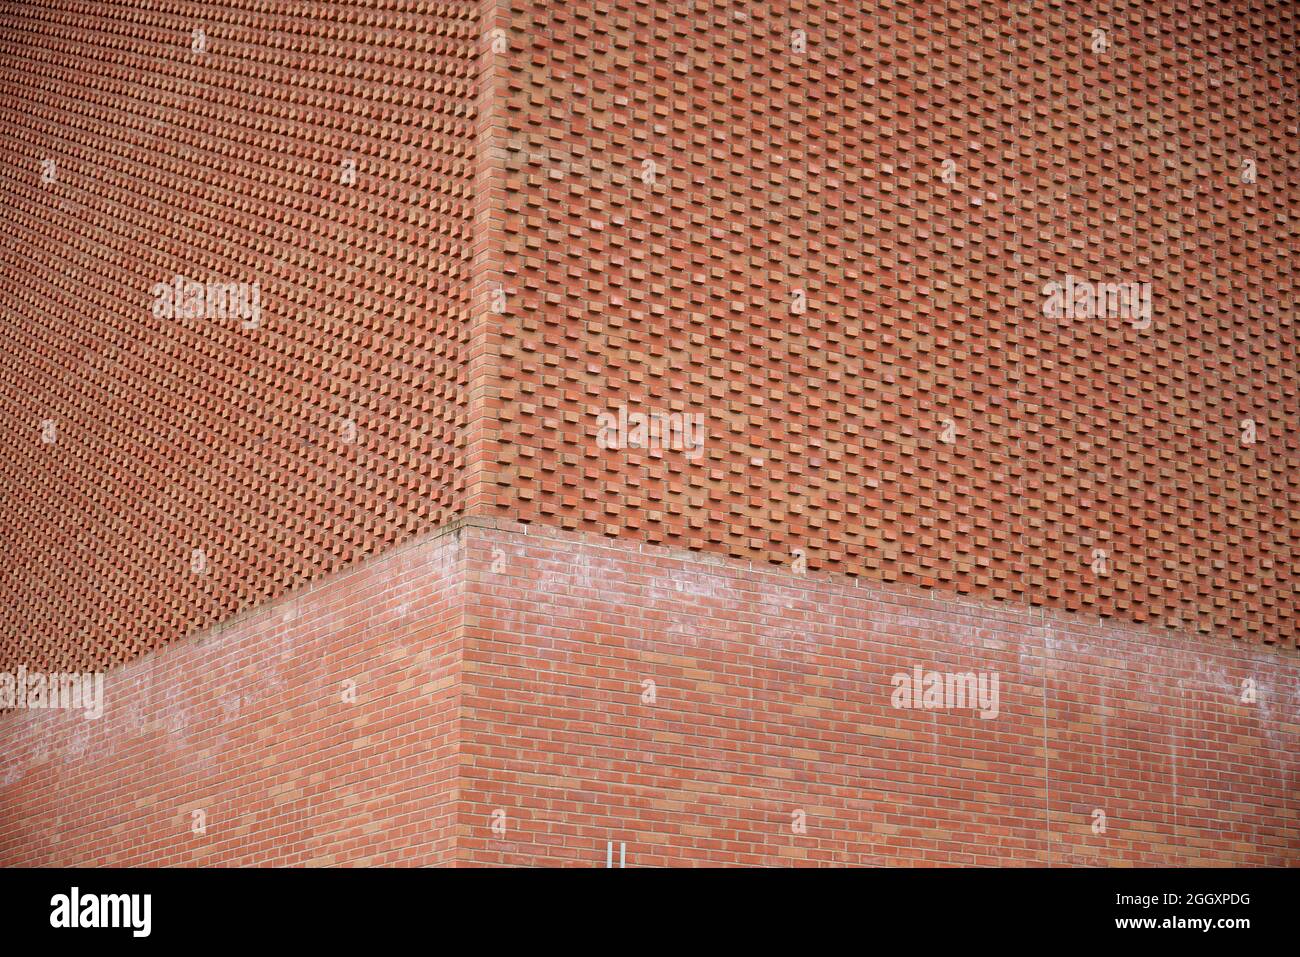 A modern red brick architectural structure with in built pattern or texture due to the positioning of the bricks. Stock Photo